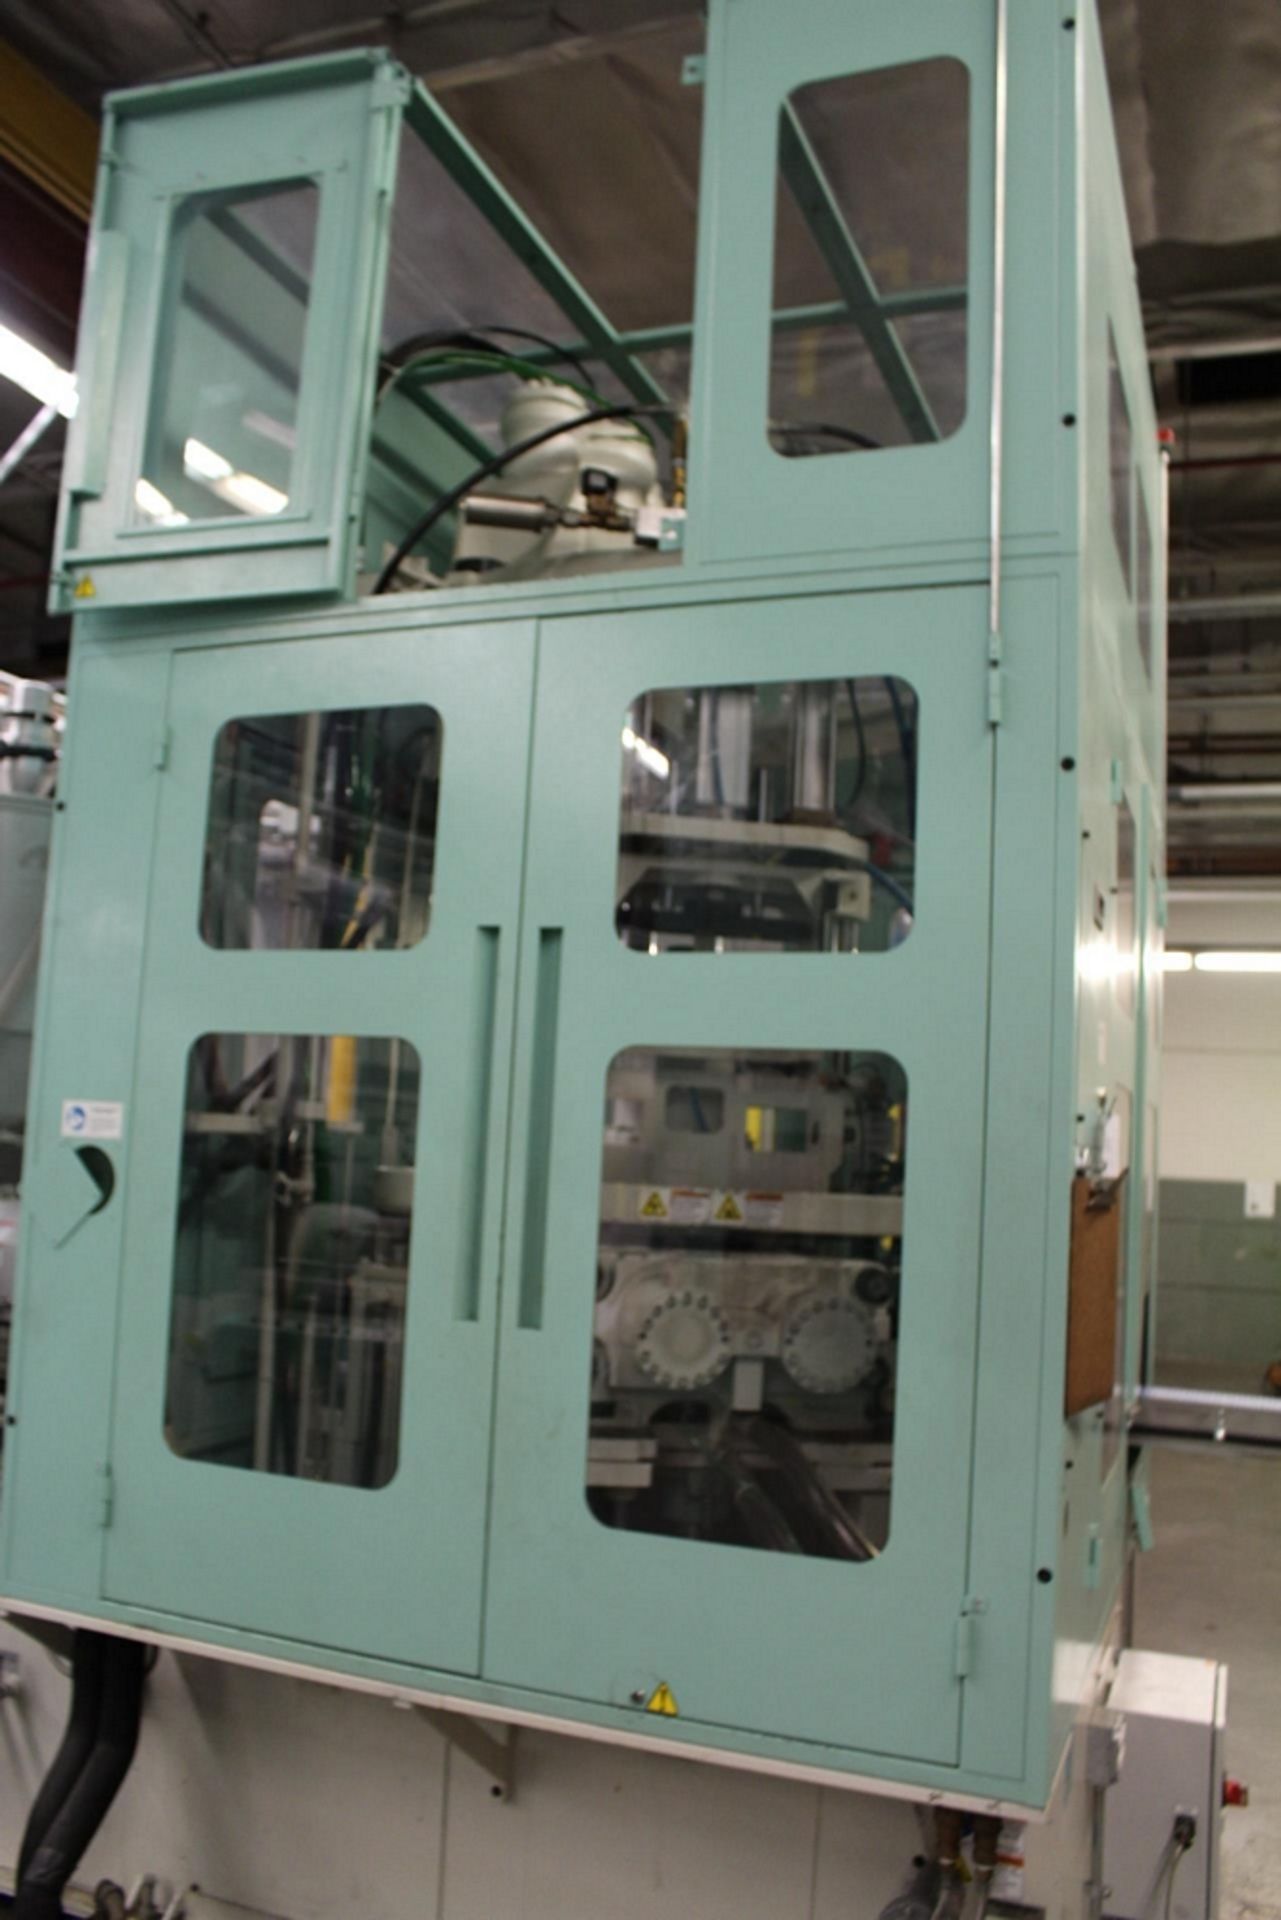 2011 AOKI SB III-250LL-50S INJECTION PET STRETCH BLOW MOLDING MACHINE, S/N SCLM0526, 50-TON, - Image 9 of 16